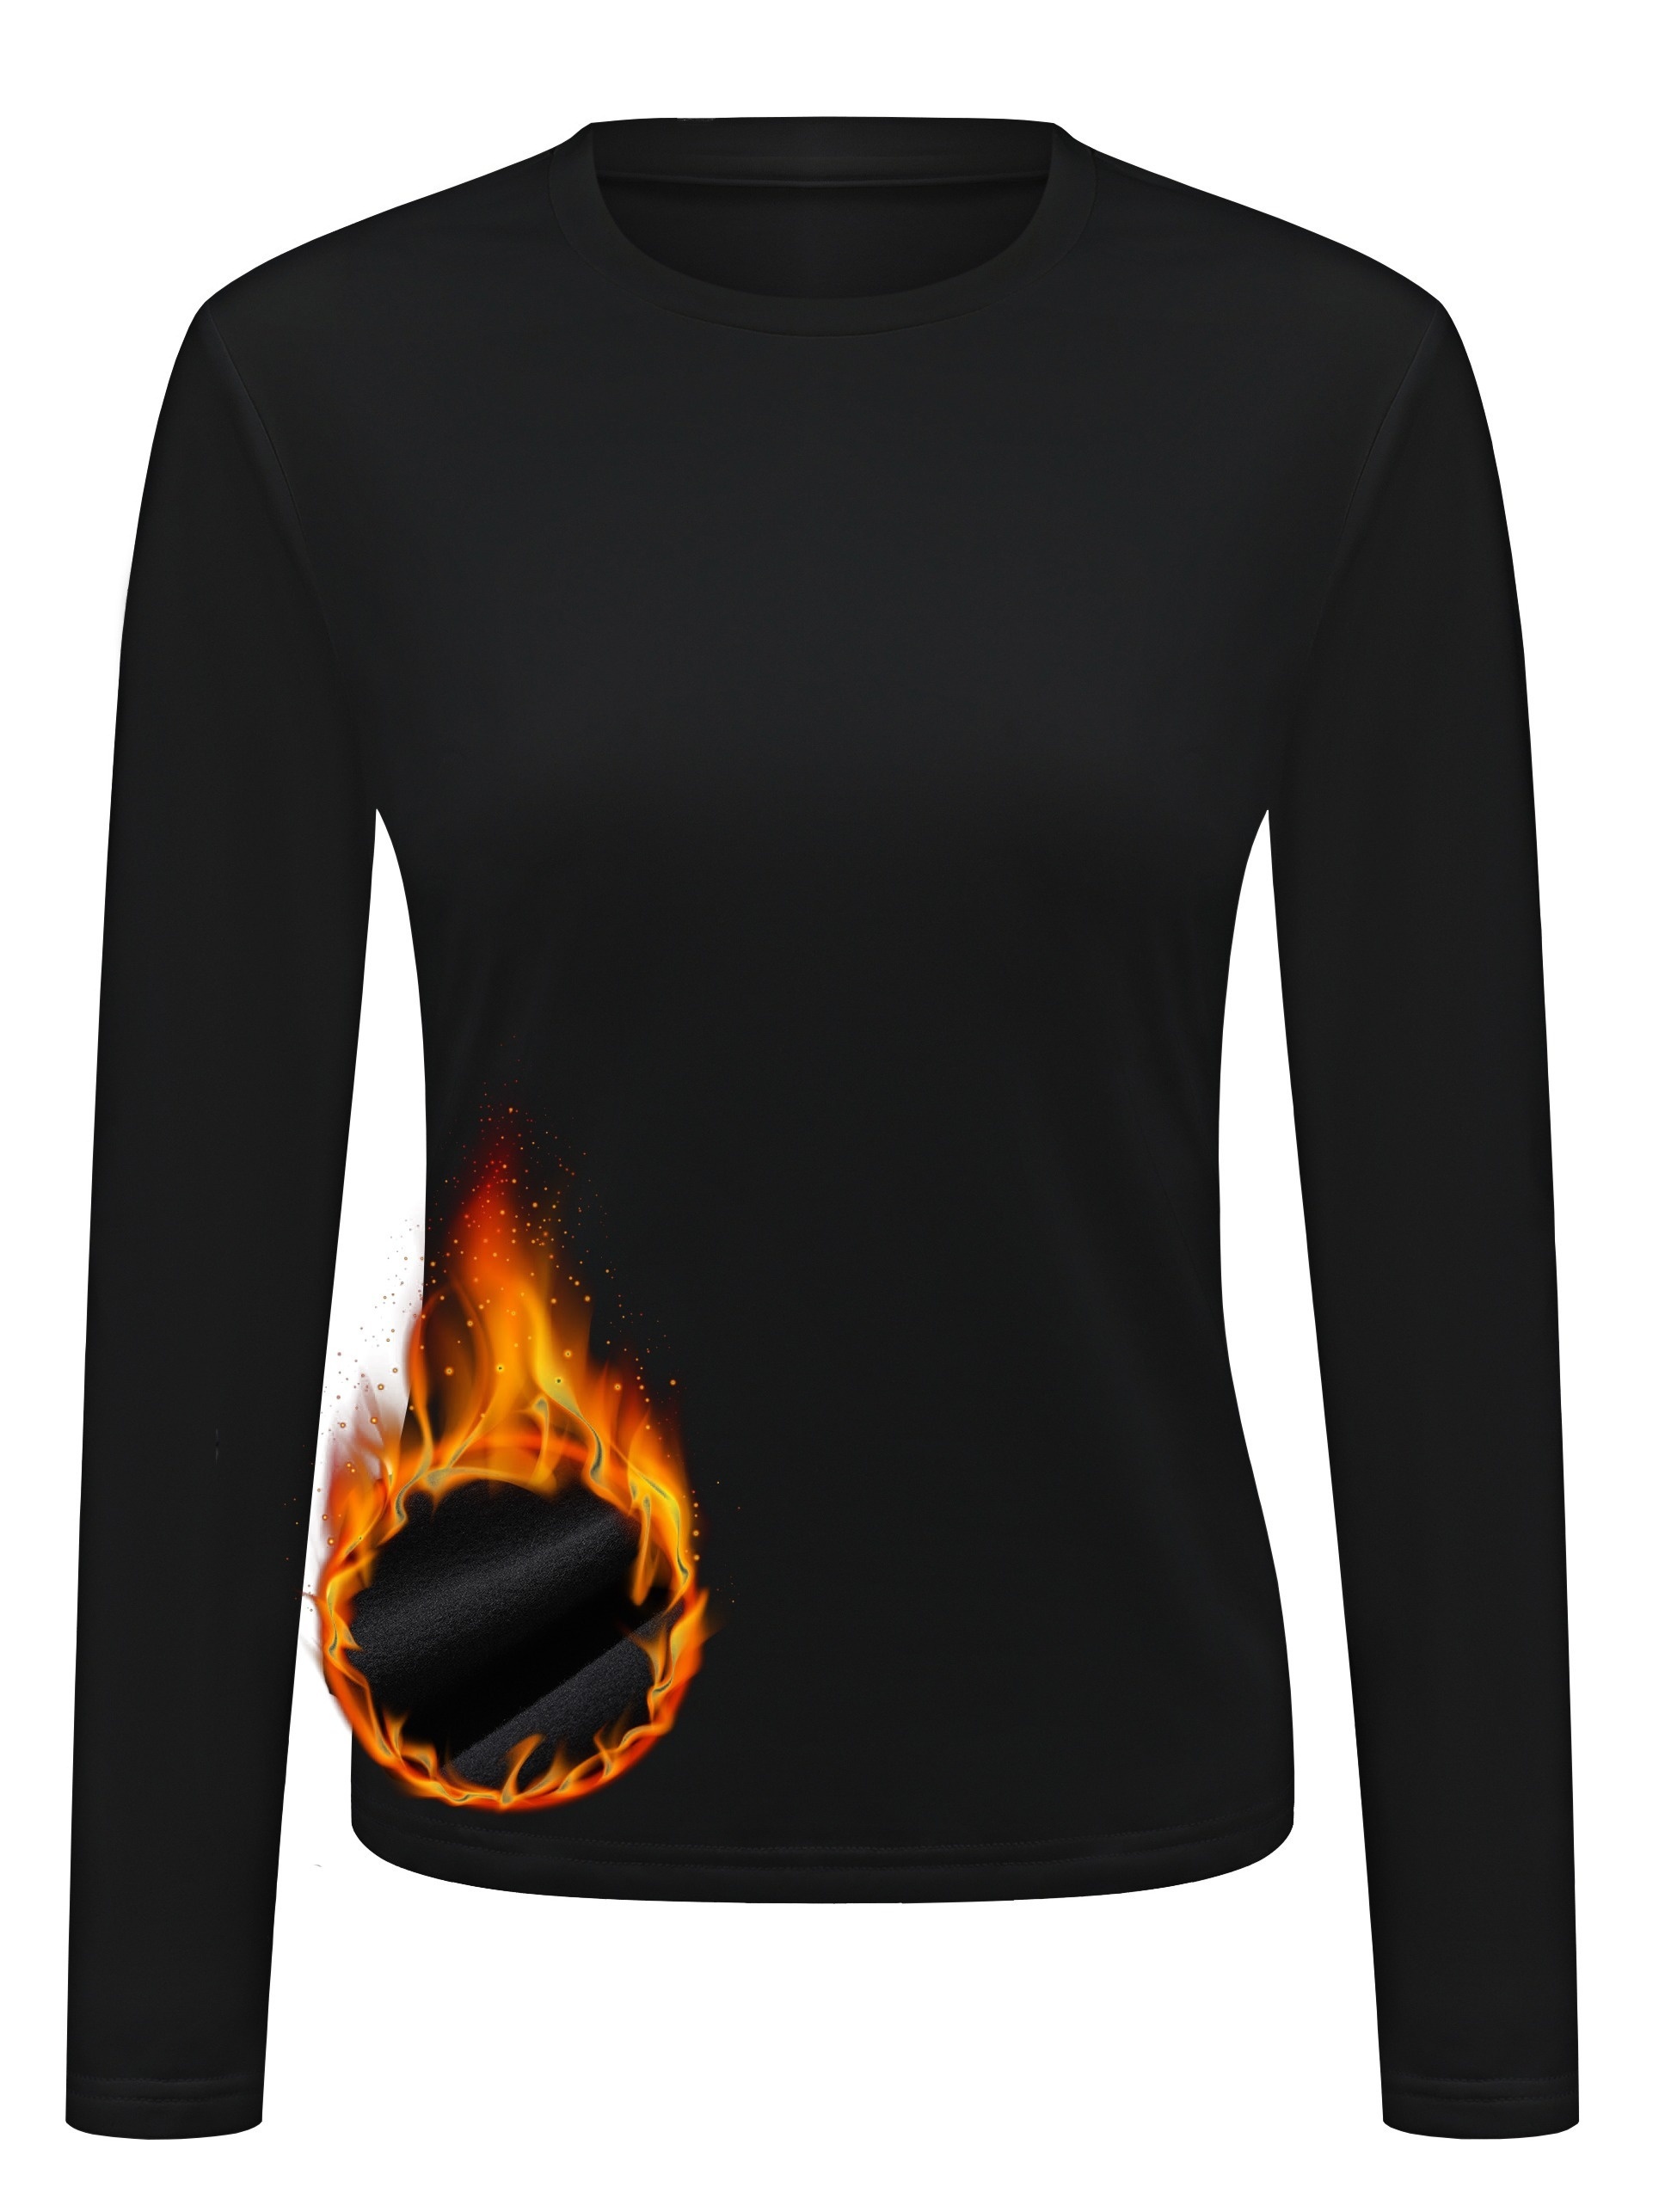 Women's Thermal Tops, Solid Long Sleeve Crew Neck Shirts, Women's Warm  Underwear For Winter, Women's Clothing